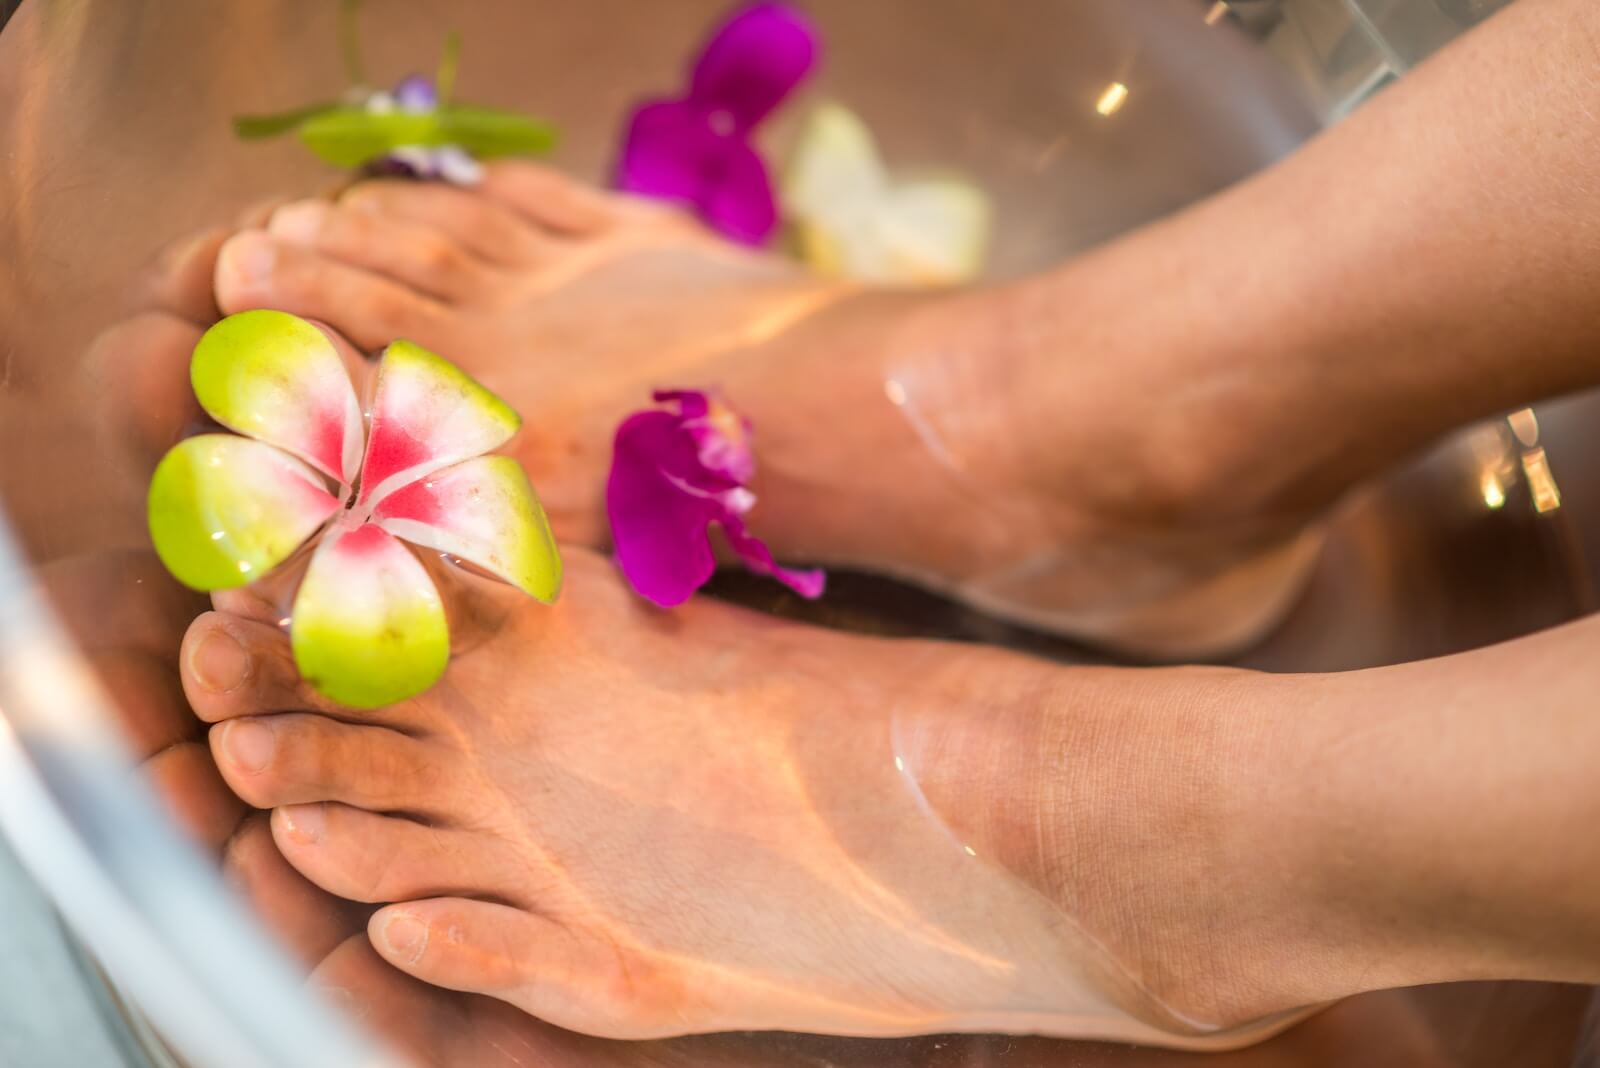 A person soaking in a foot bath with flowers